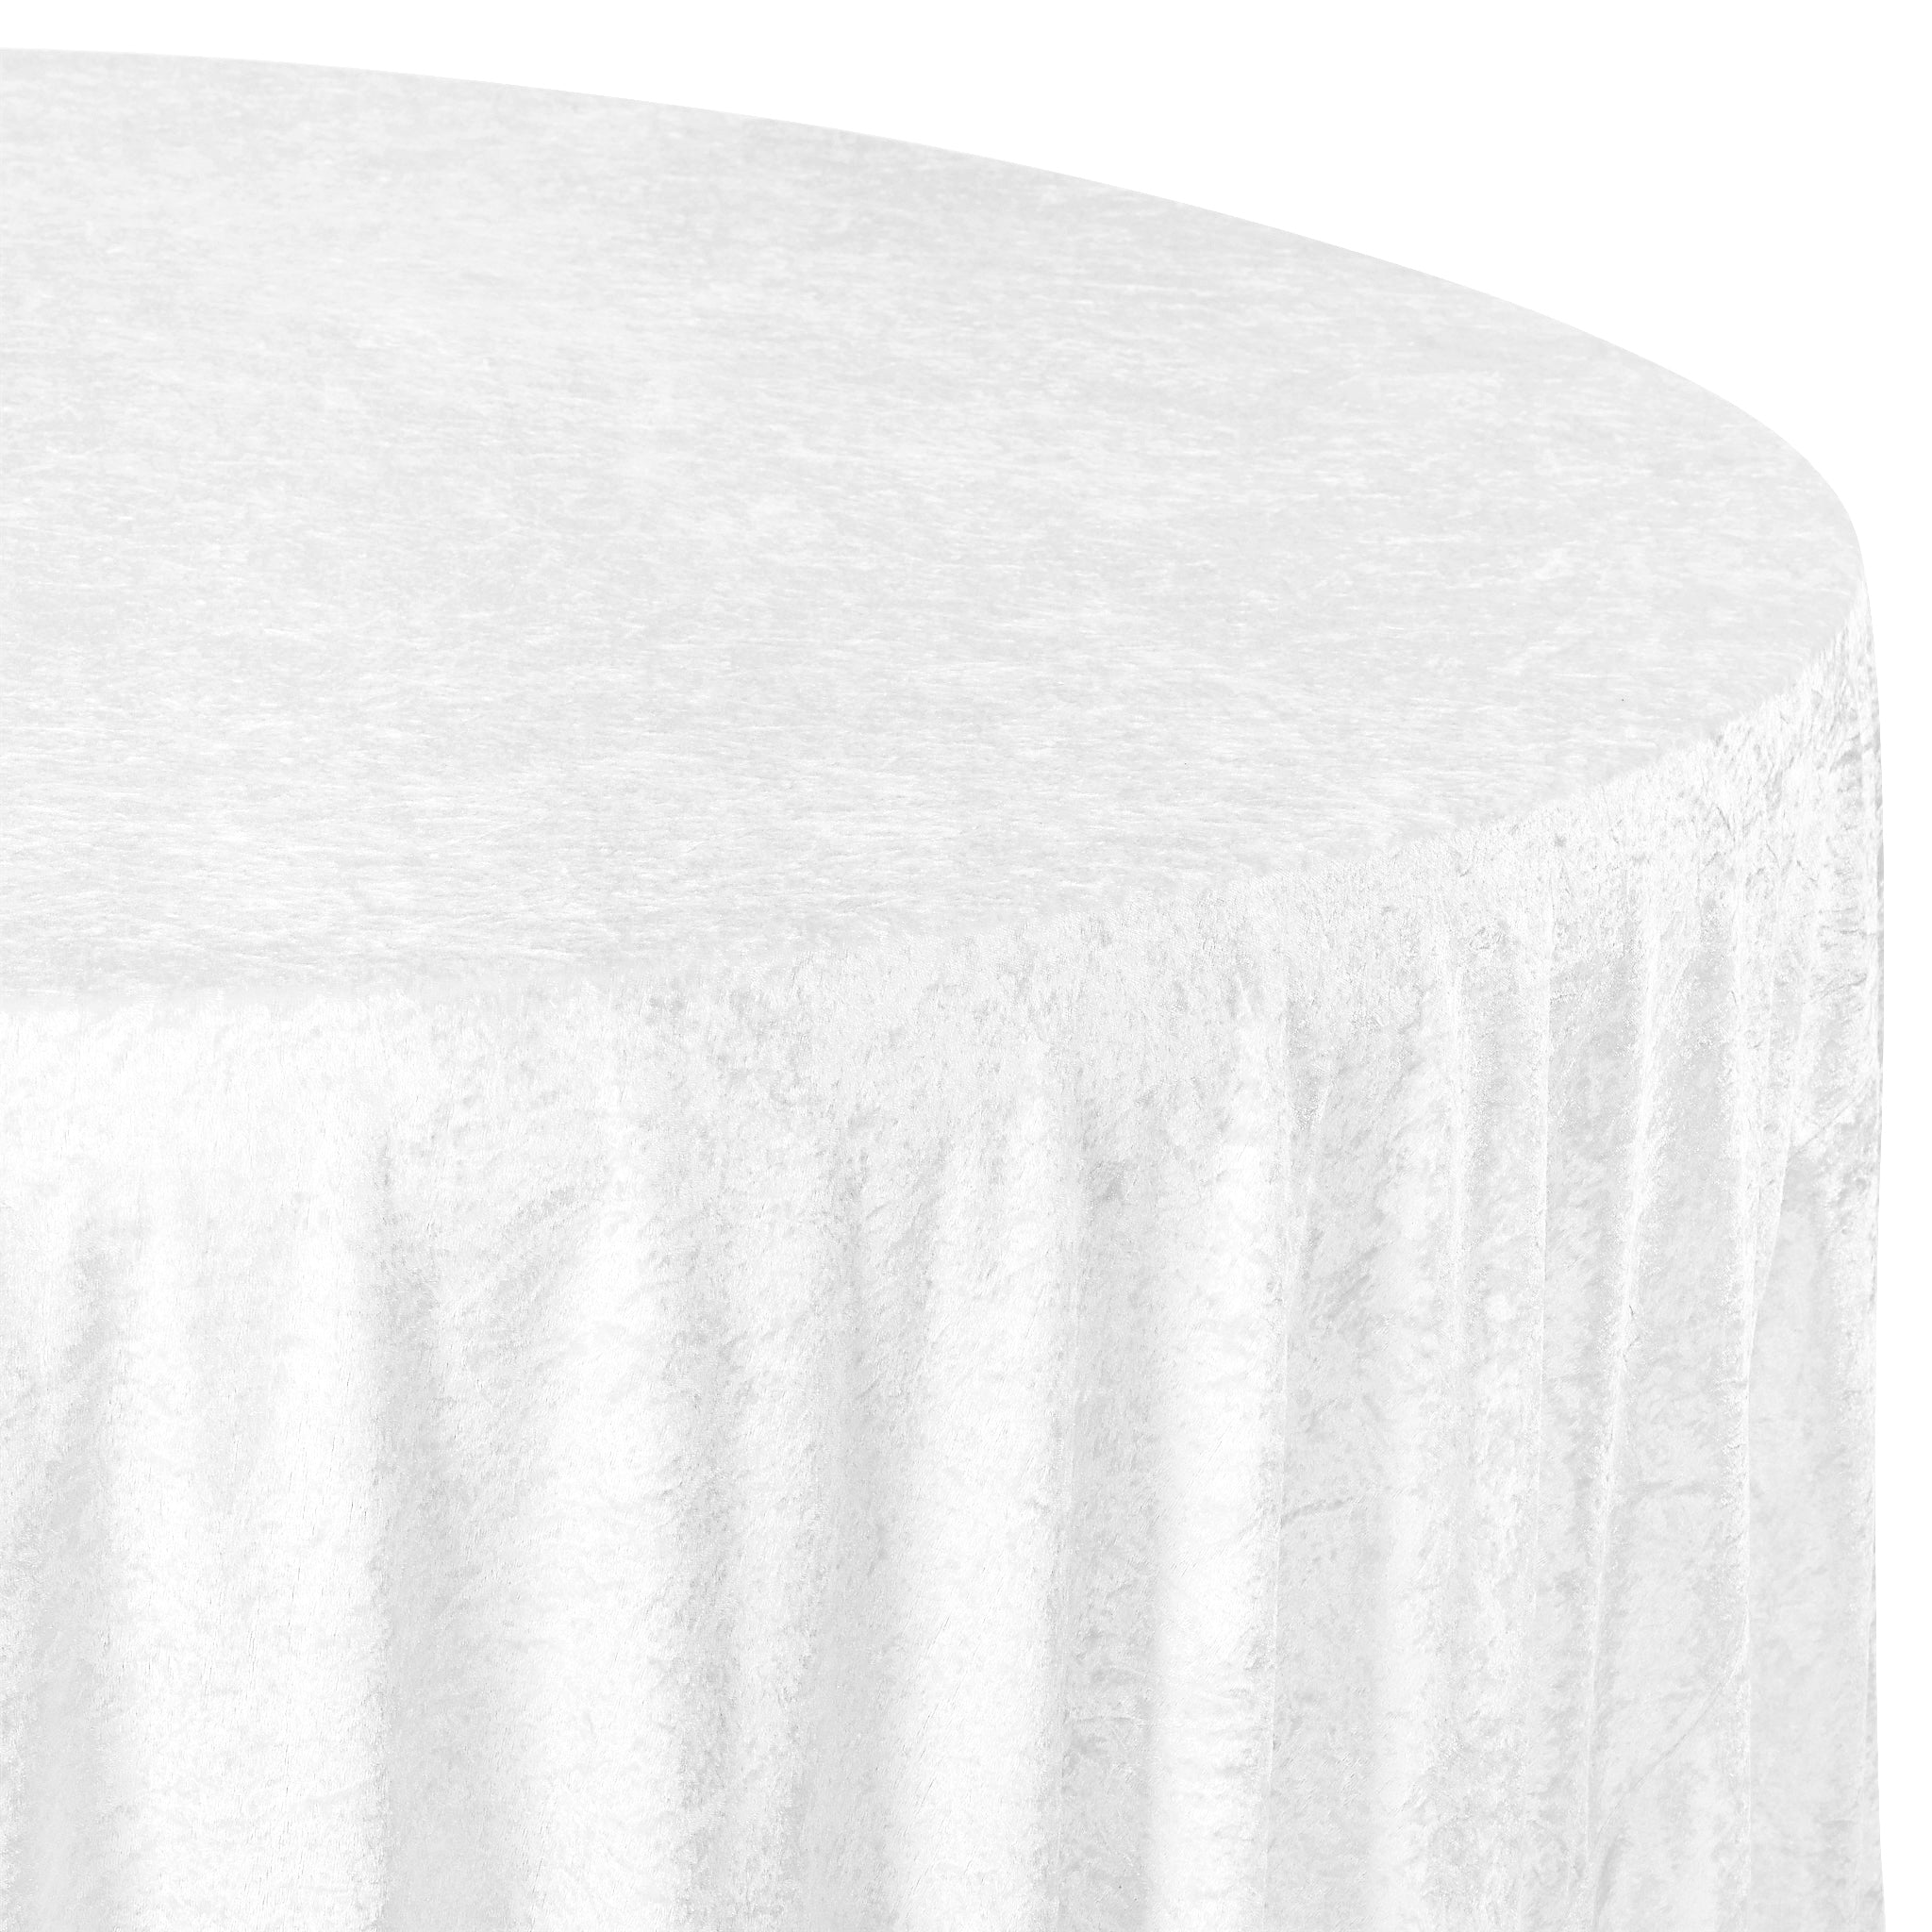 LV Designs 132” Round Table Linens in Green Fern (6)